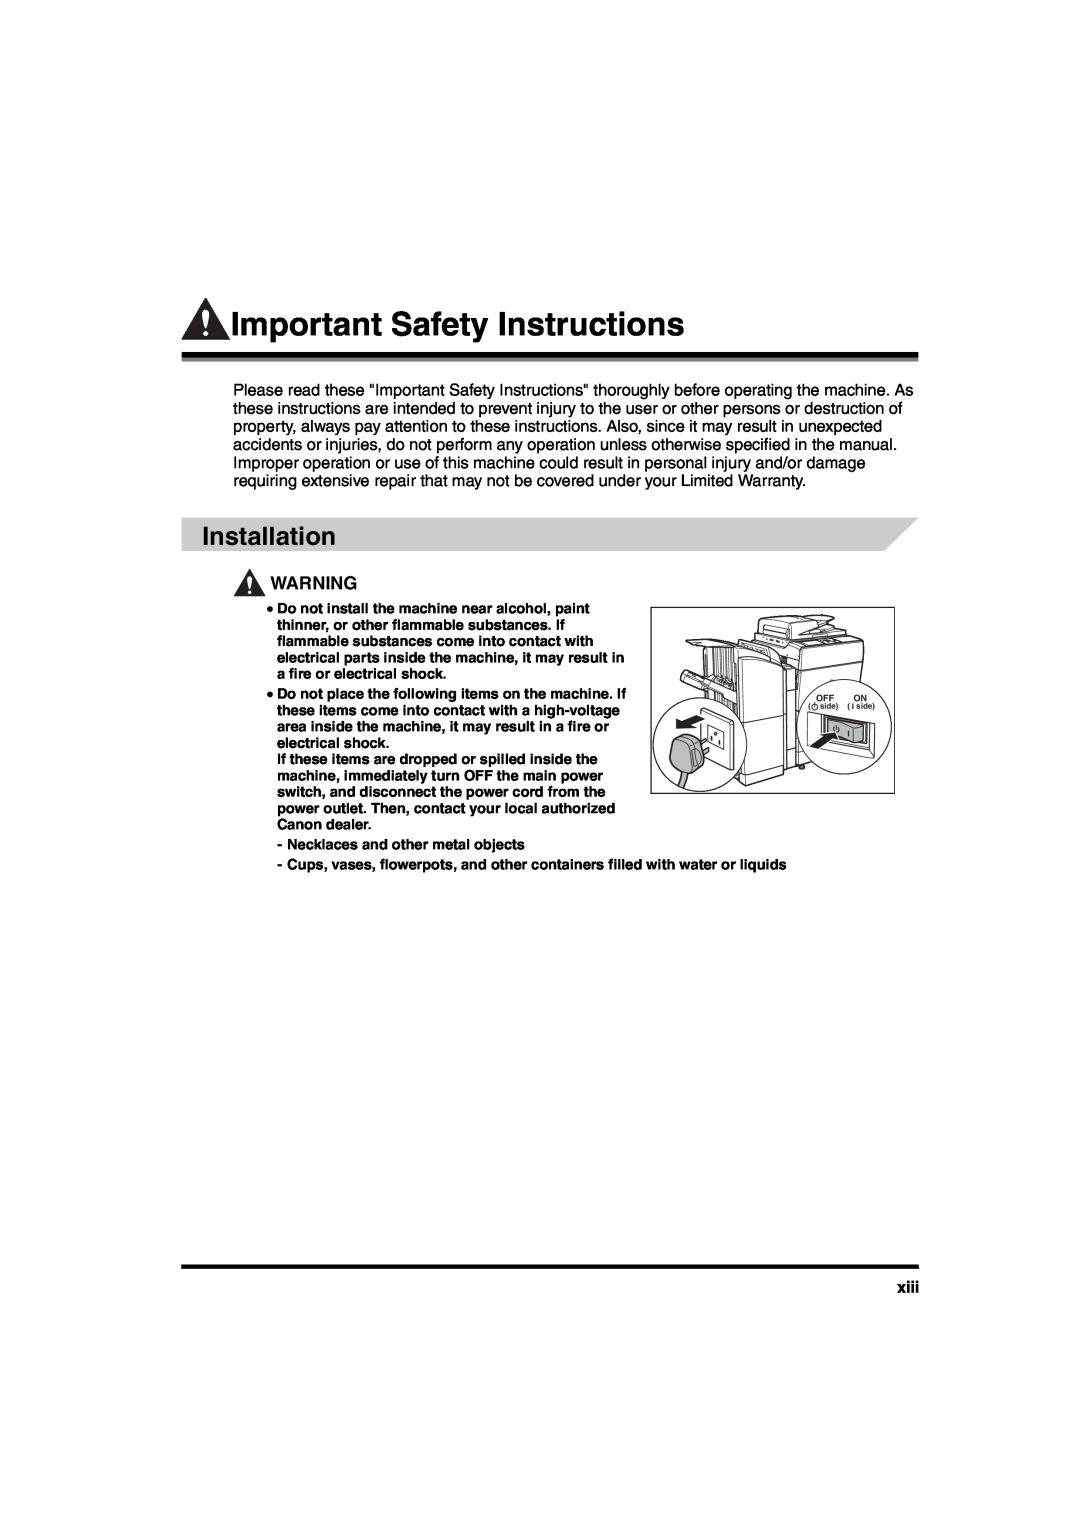 Canon iR6570 manual Important Safety Instructions, Installation, xiii 